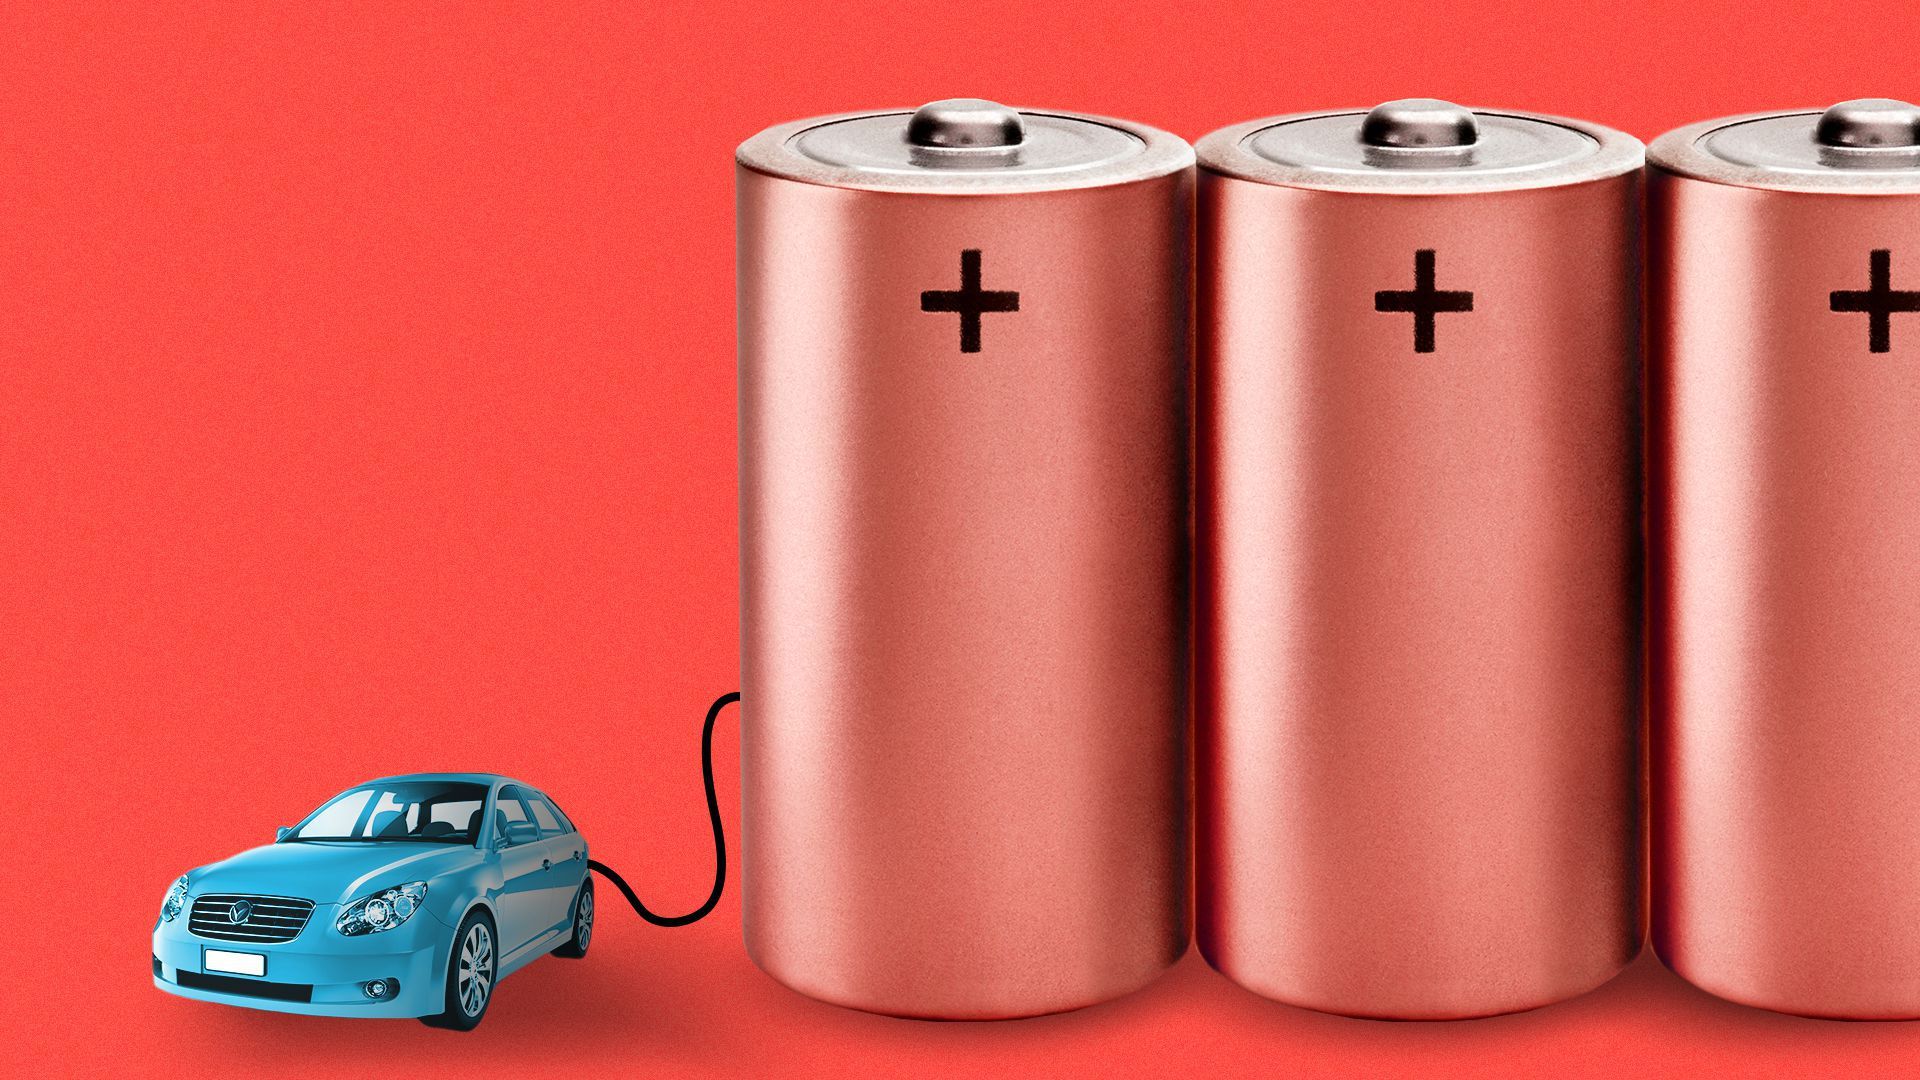 Illustration of an electric car plugged into giant-size batteries. 